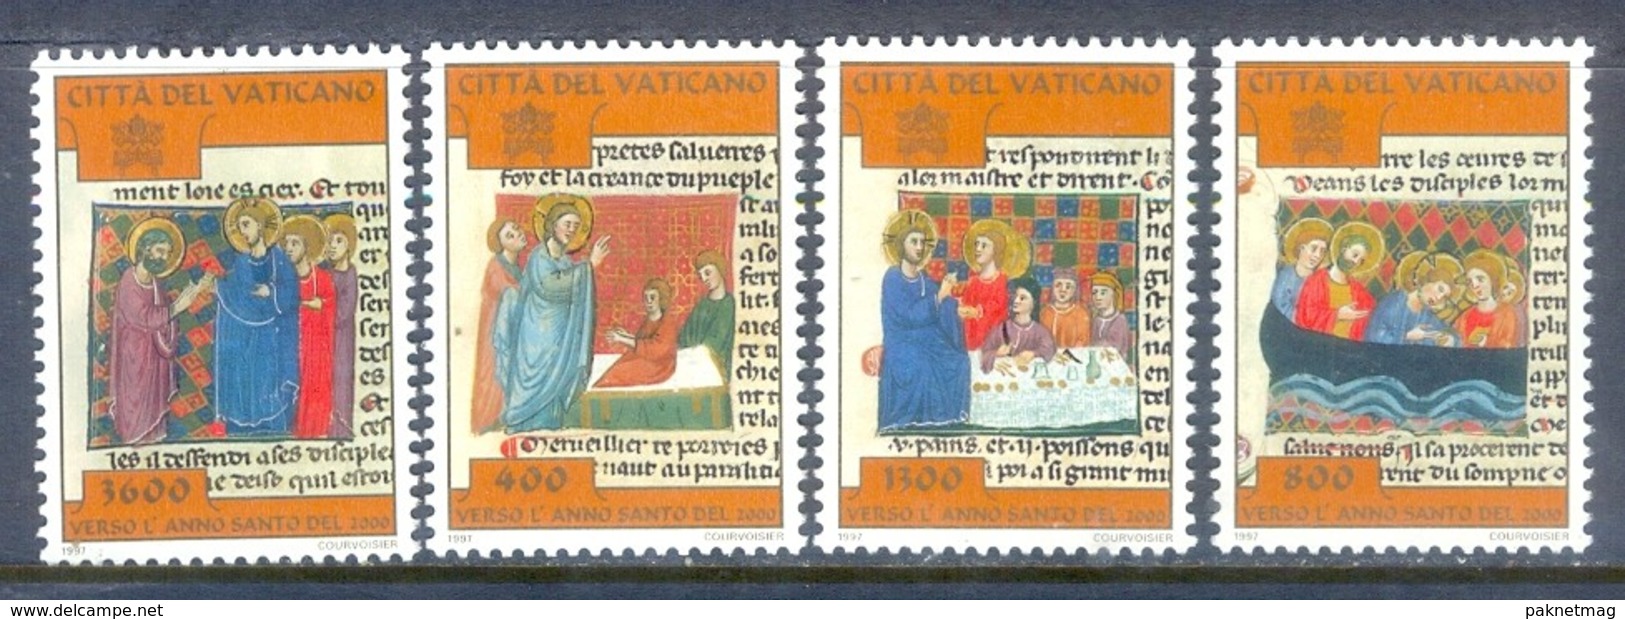 M93- Vatican 1997 Holy Year 2000 3rd Issue. - Unused Stamps